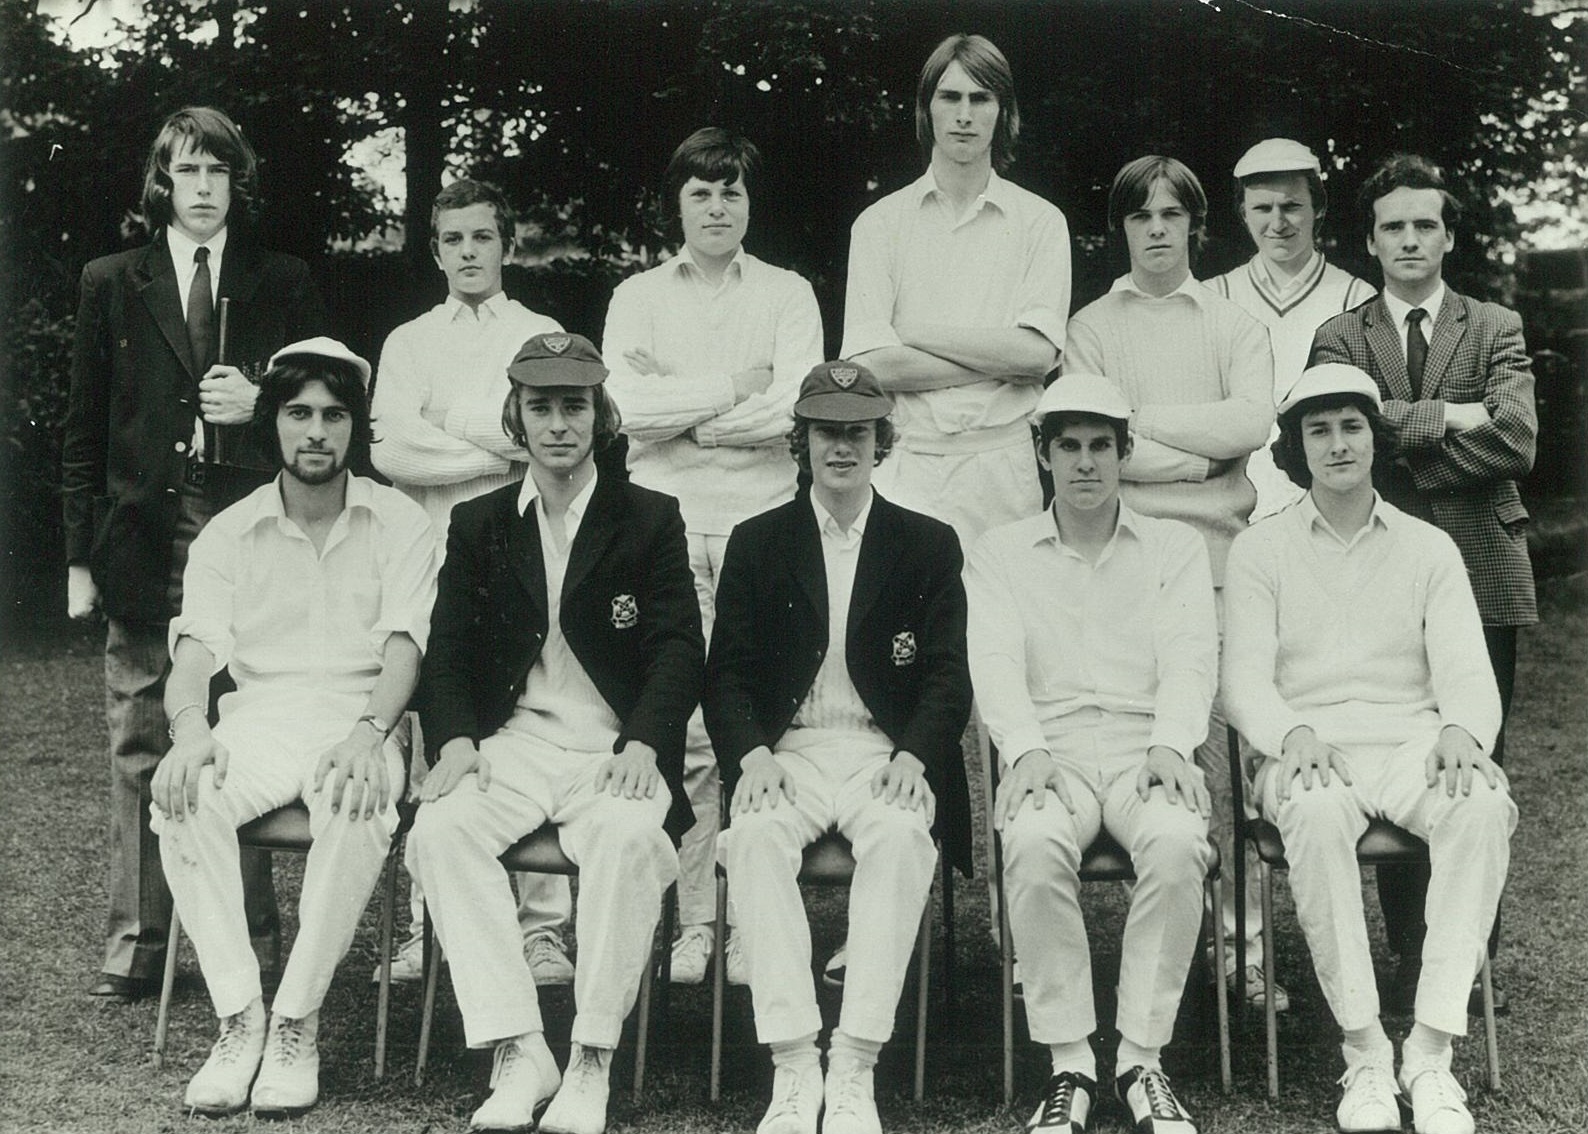 Black and white image of young men's cricket group posing for a photo